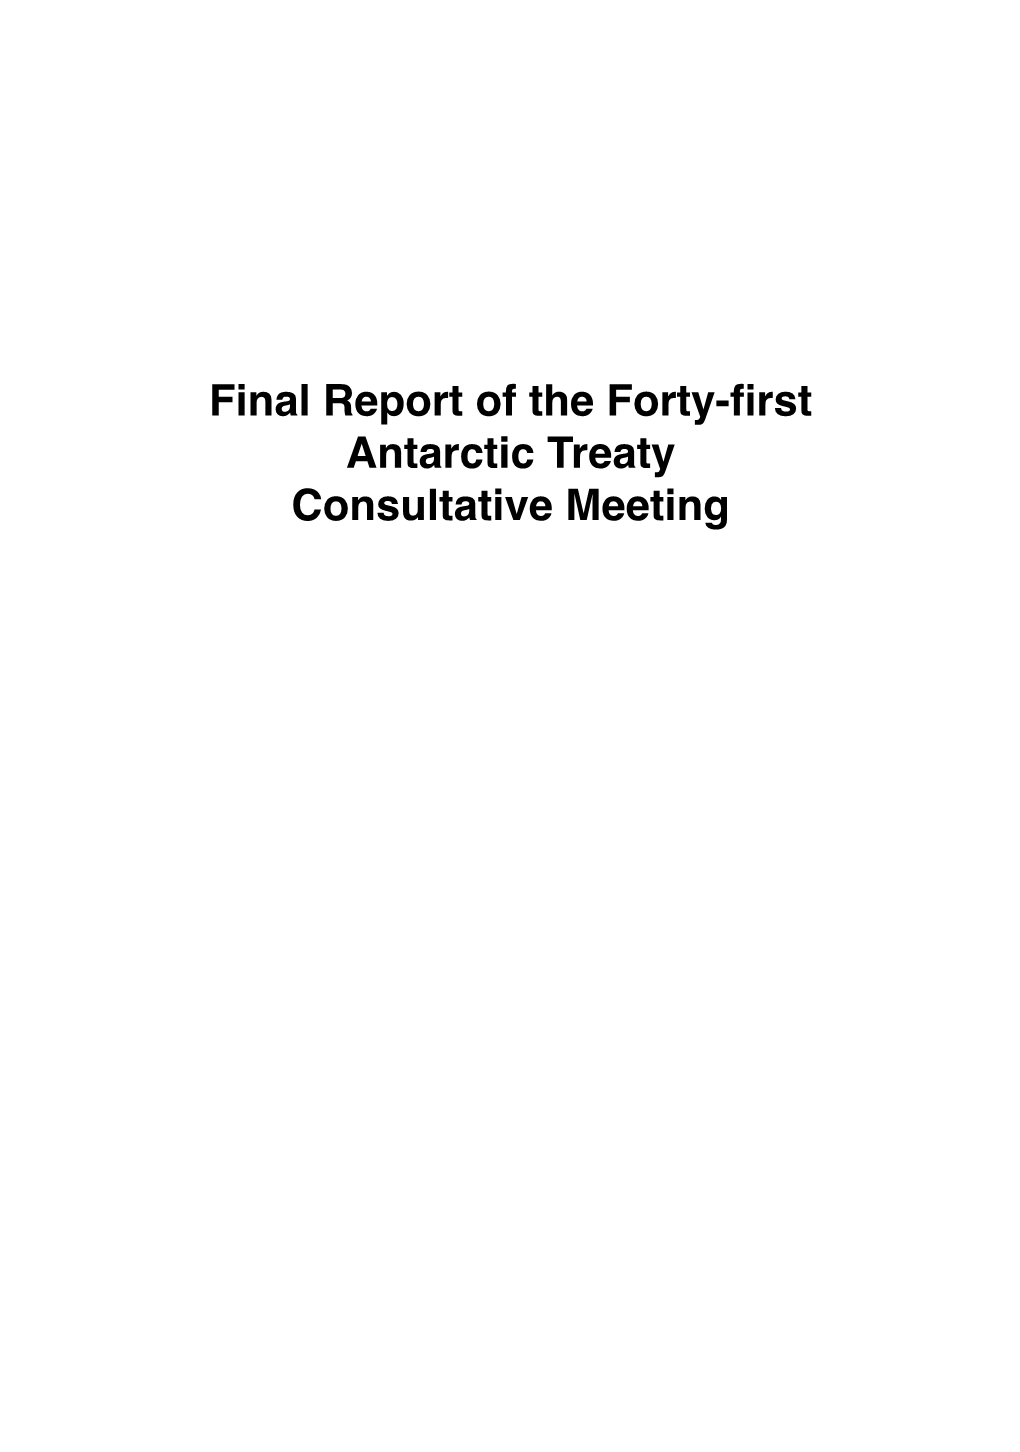 Final Report of the Forty-First Antarctic Treaty Consultative Meeting